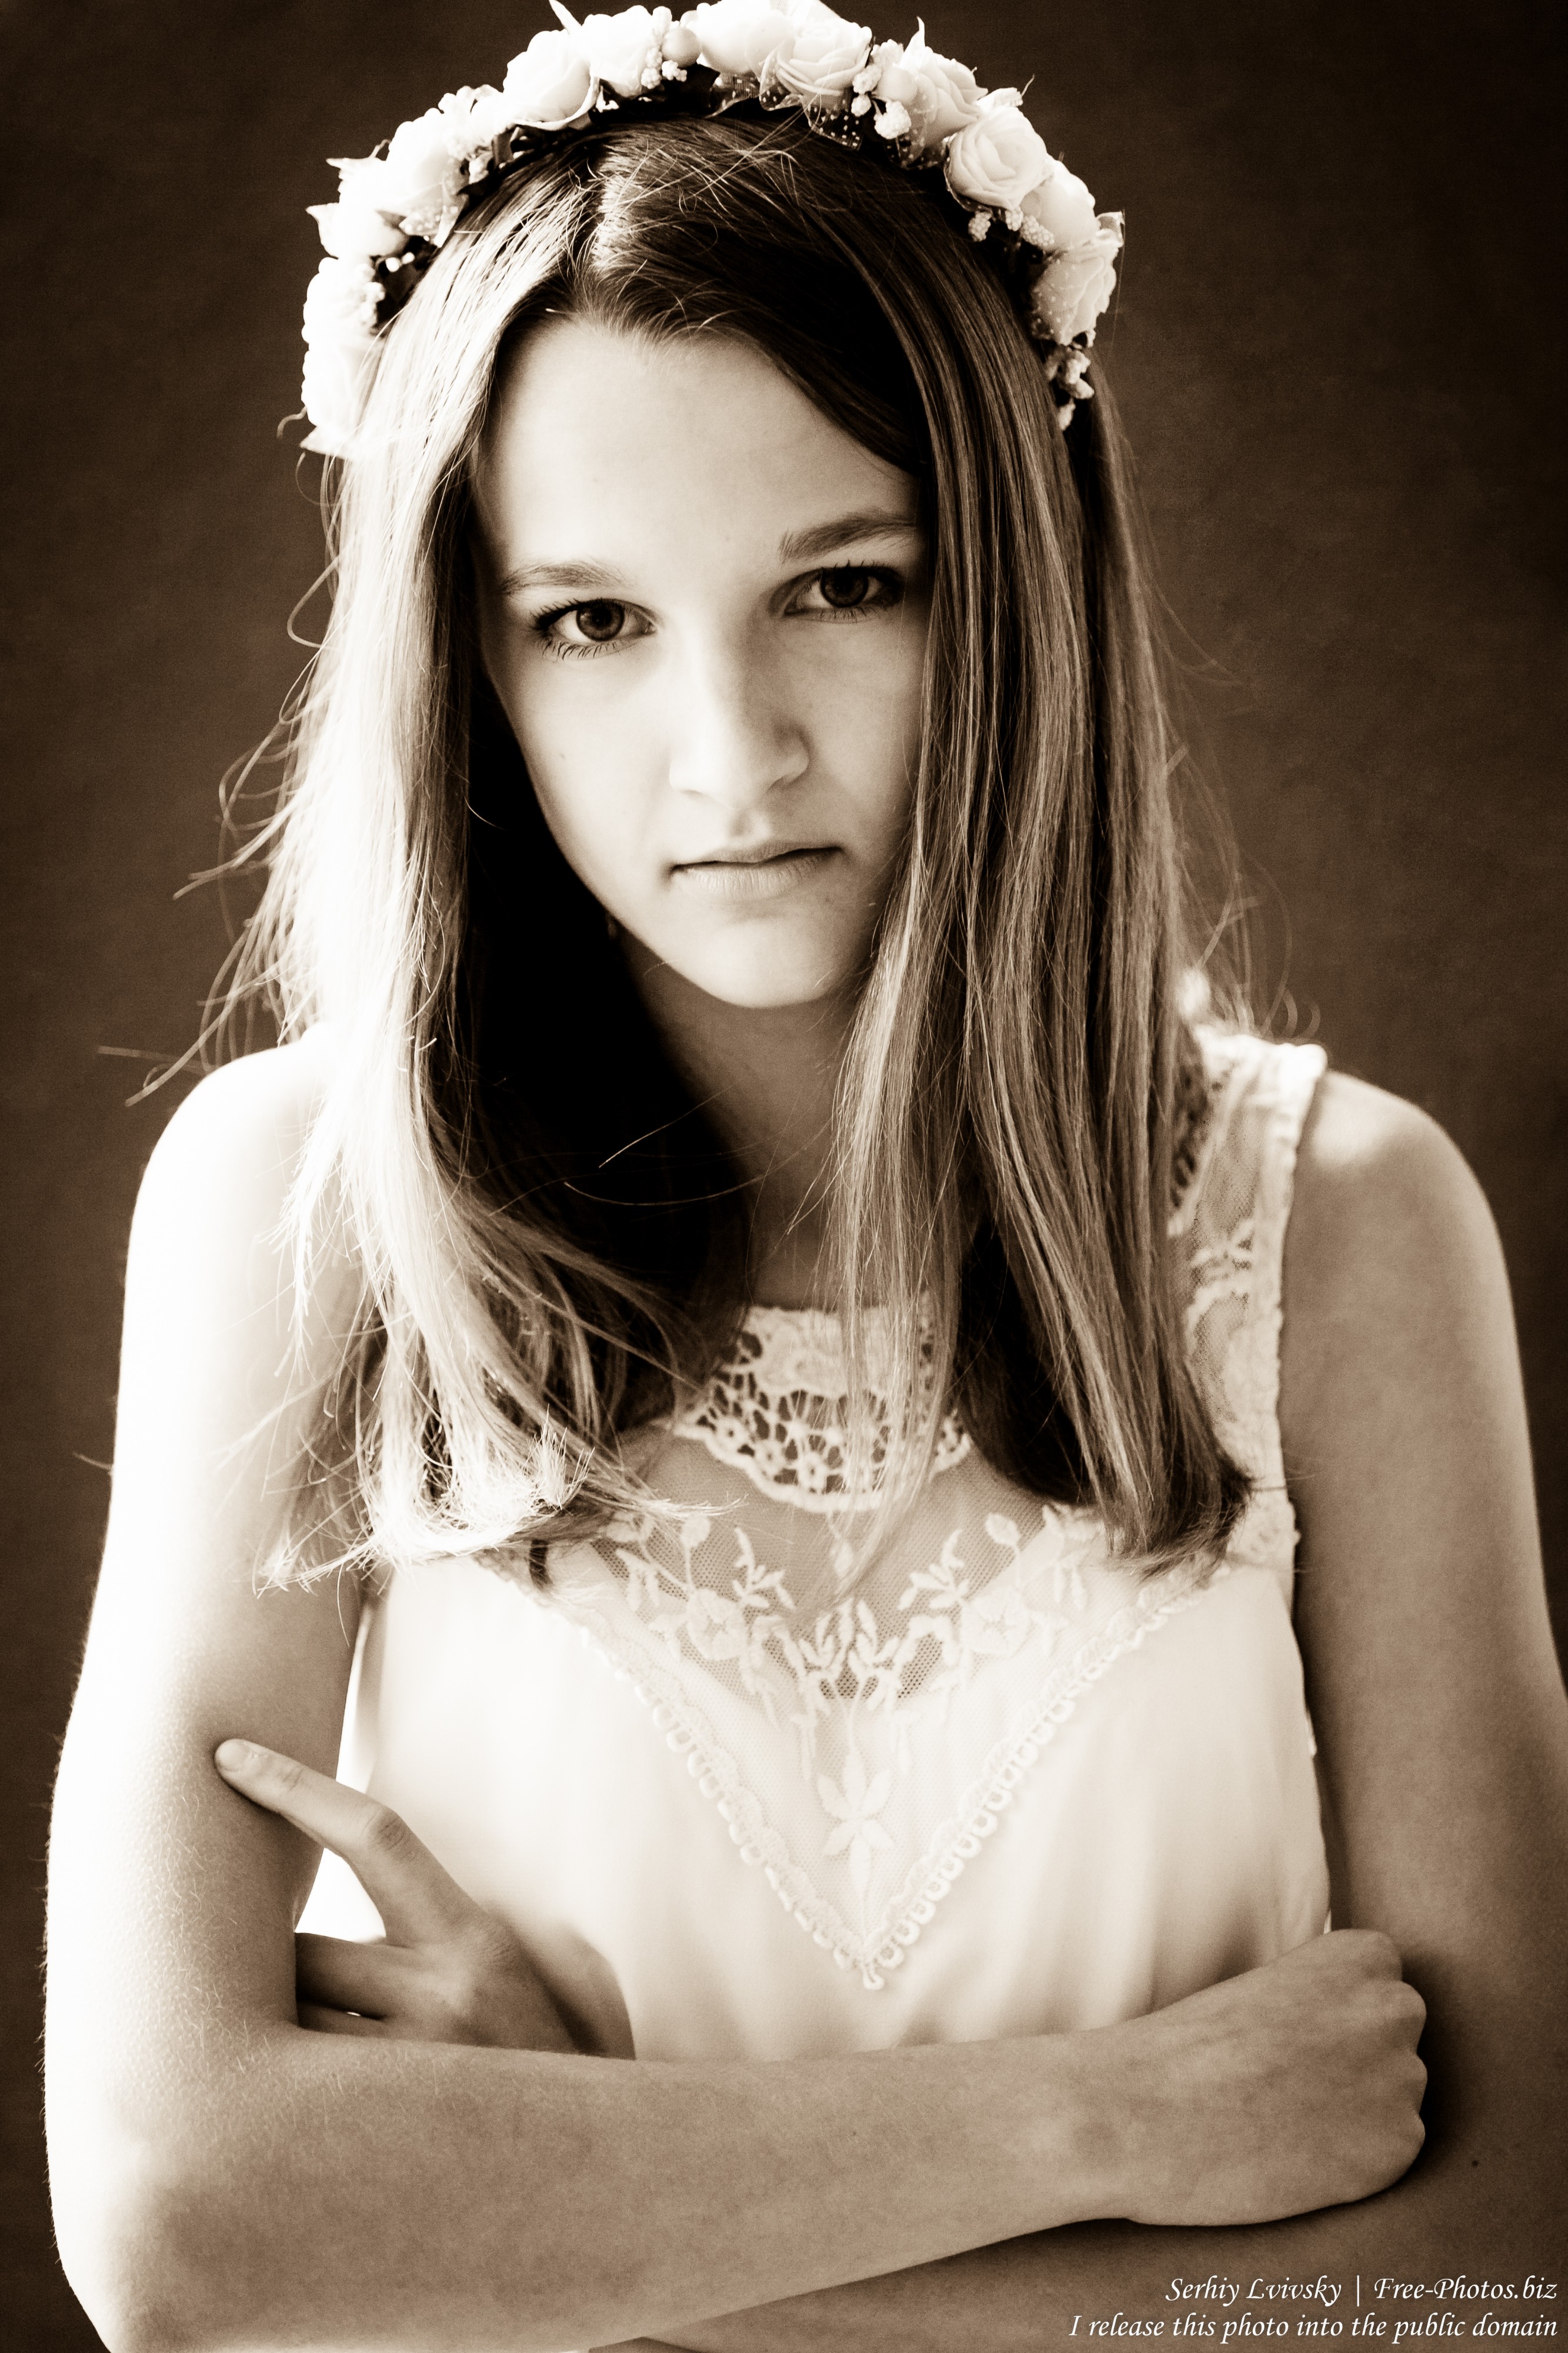 a 13-year-old Catholic girl in a white dress photographed in June 2015, picture 6